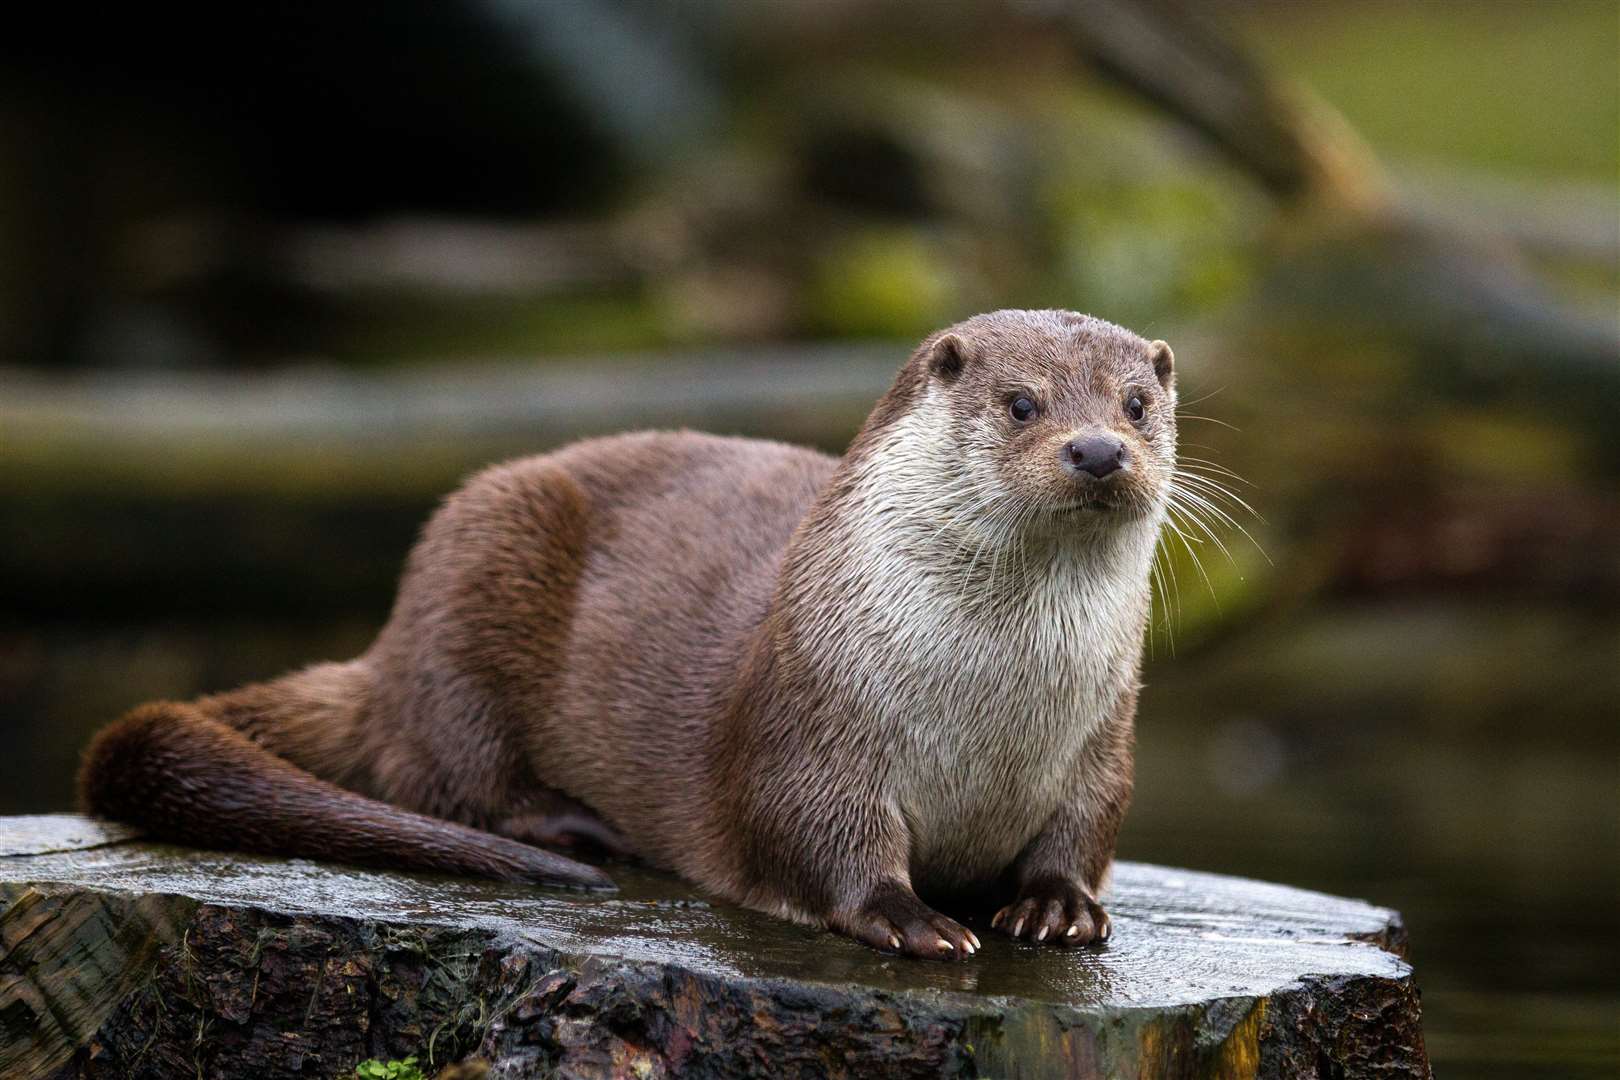 Otters could find a new home there. Stock image